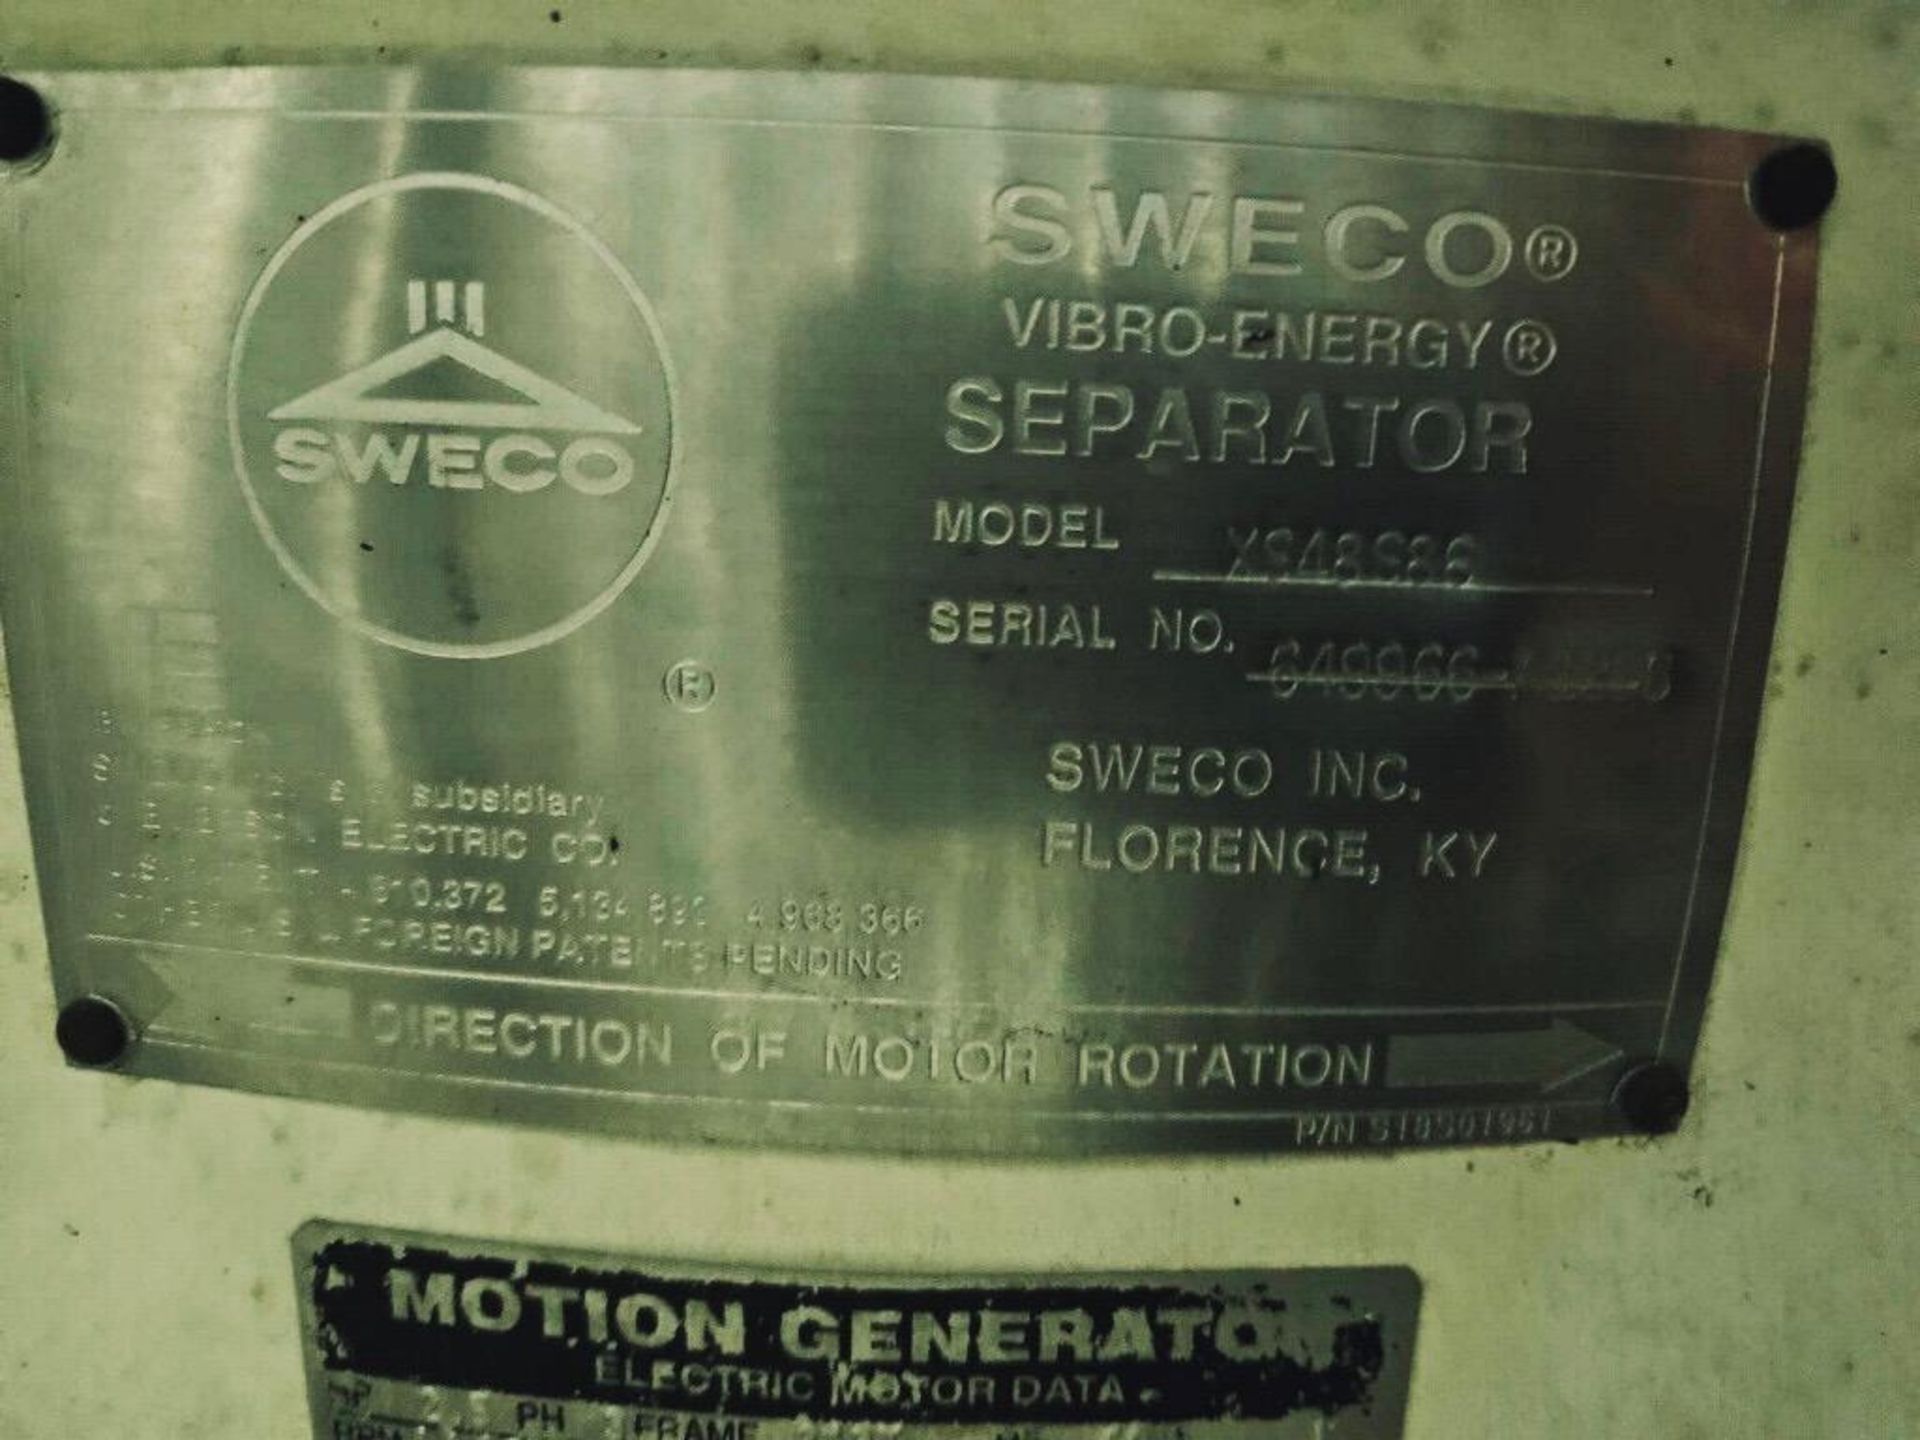 Sweco XS48S86 48” 2 Deck Stainless Steel Vibratory Separator - Image 8 of 9